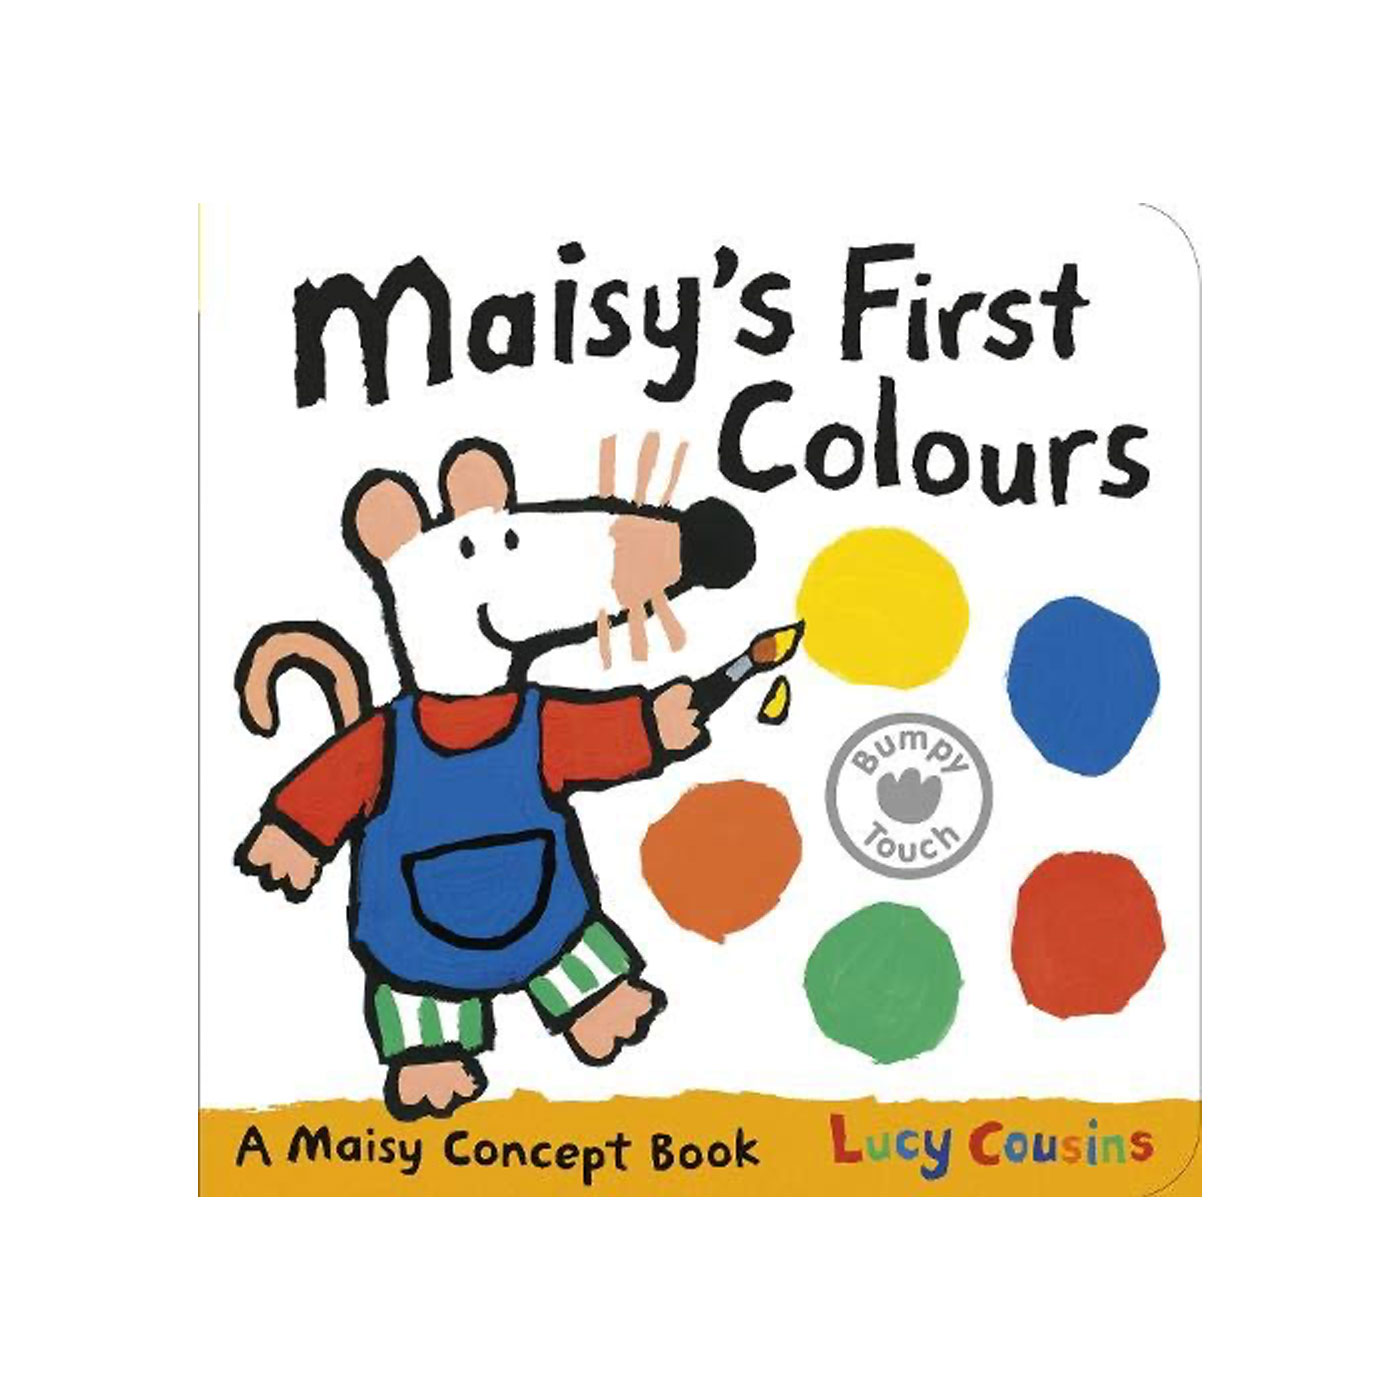  Maisy's First Colours